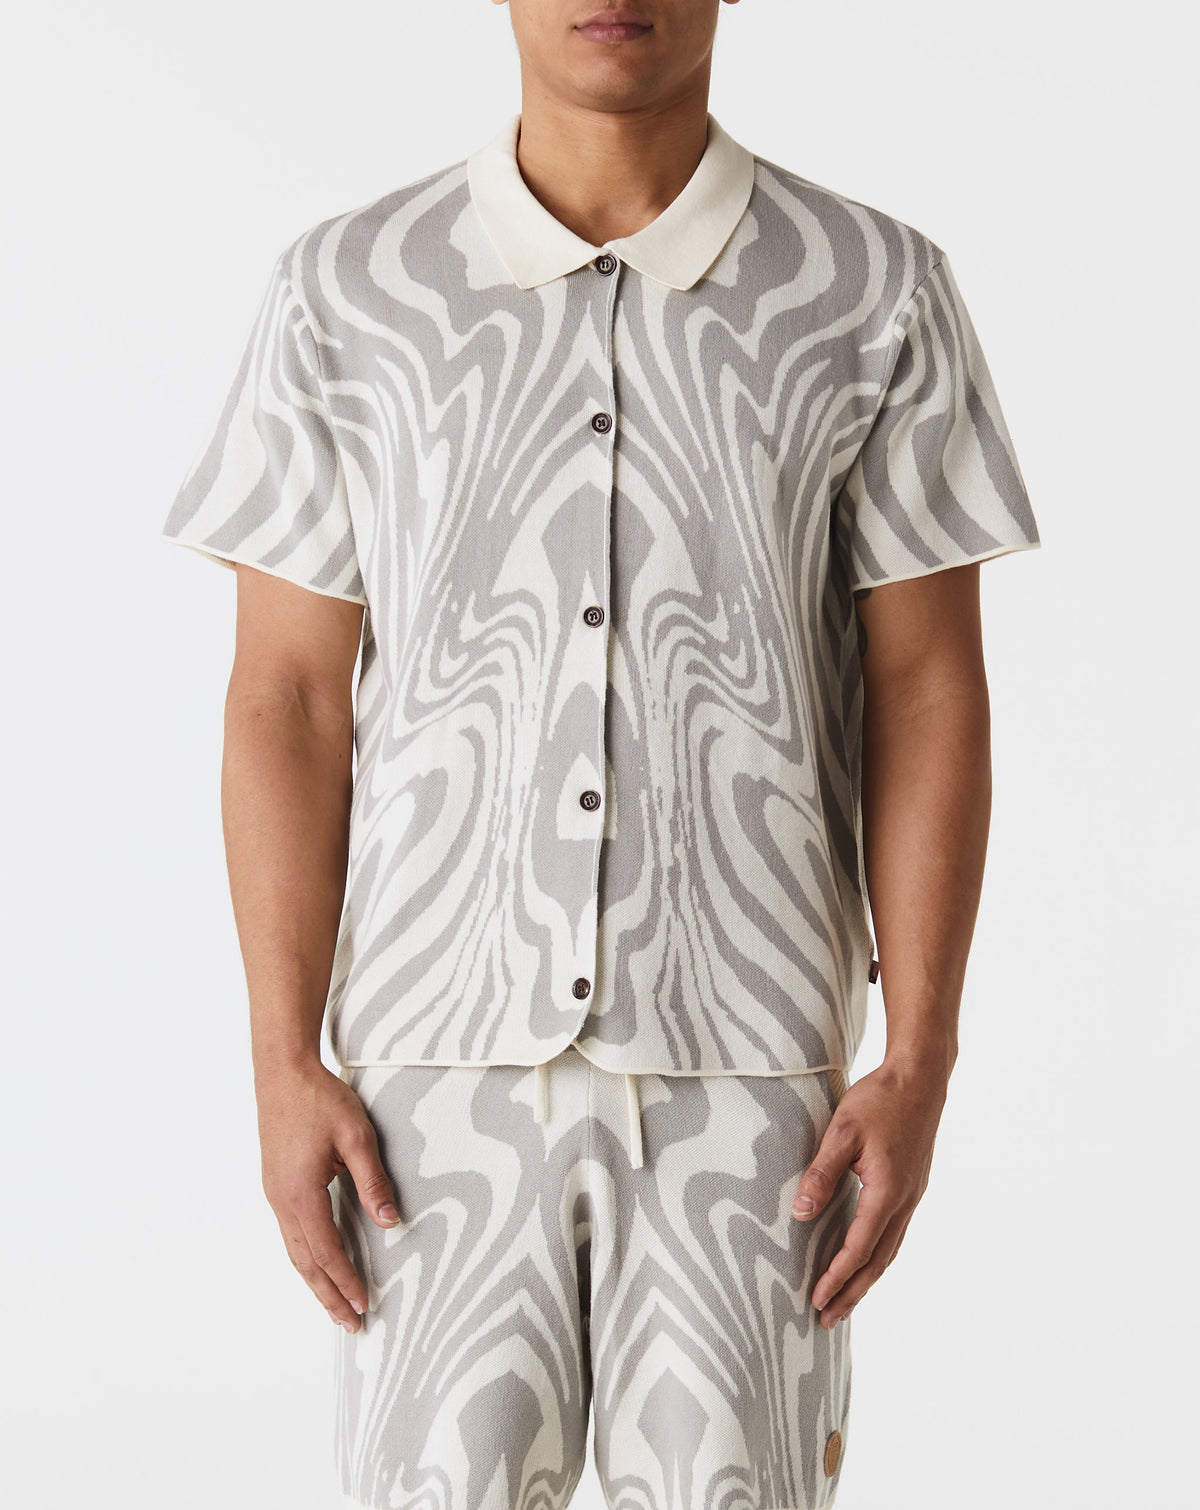 Honor The Gift Dazed Button Up - Rule of Next Apparel